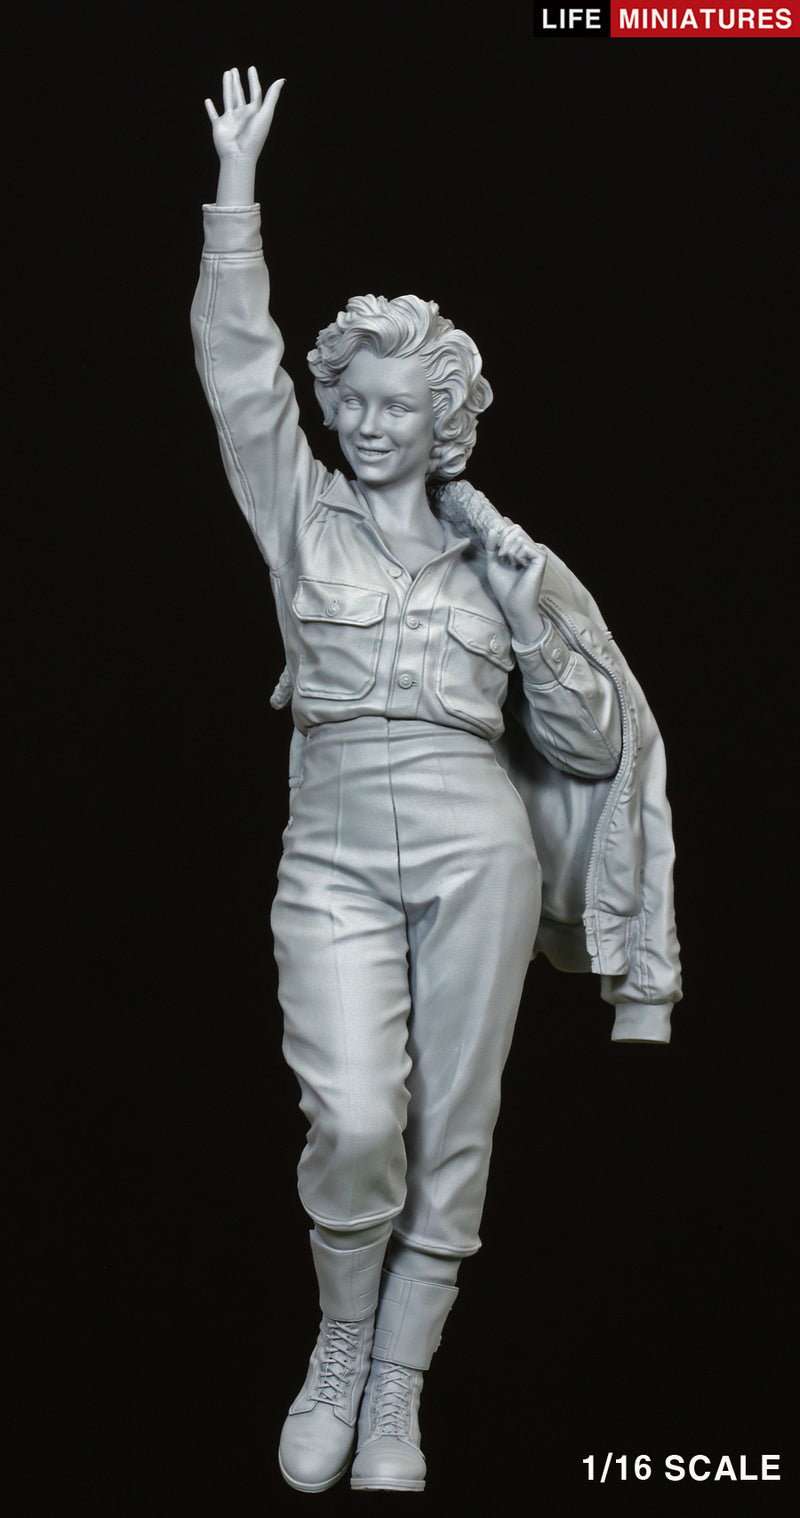 Marilyn Monroe in Korea for her USO tour 1954 (1/16 Scale)